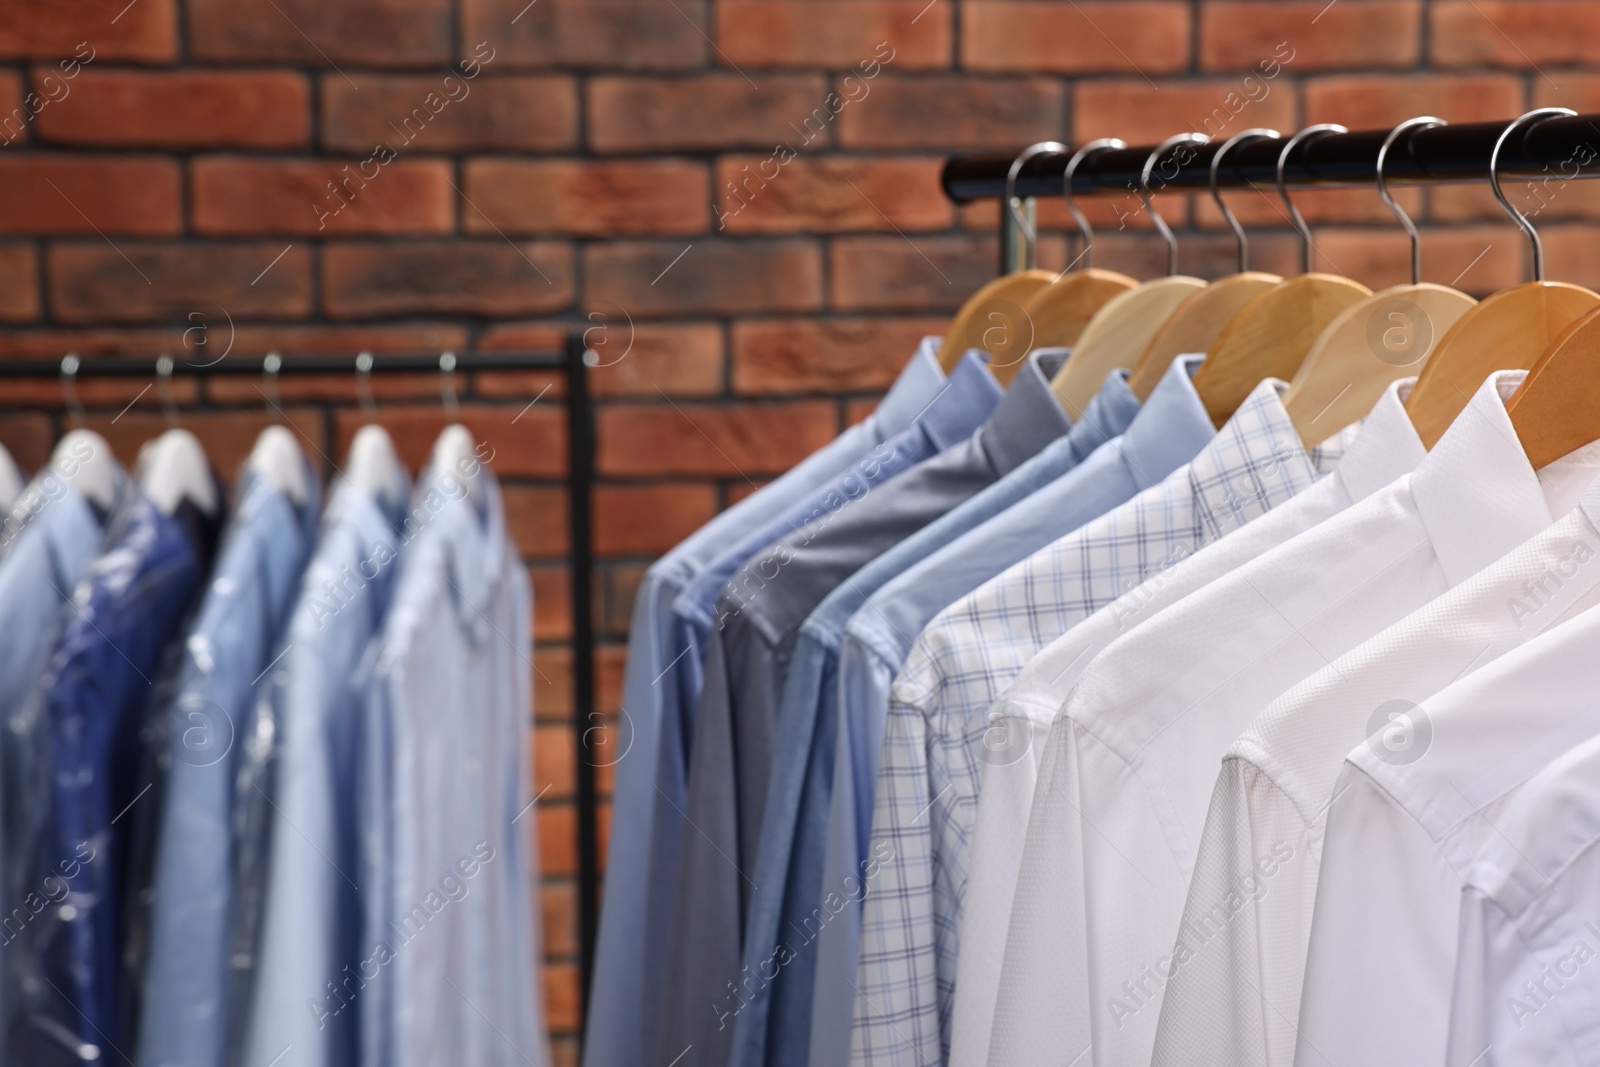 Photo of Dry-cleaning service. Many different clothes hanging on rack against brick wall, closeup